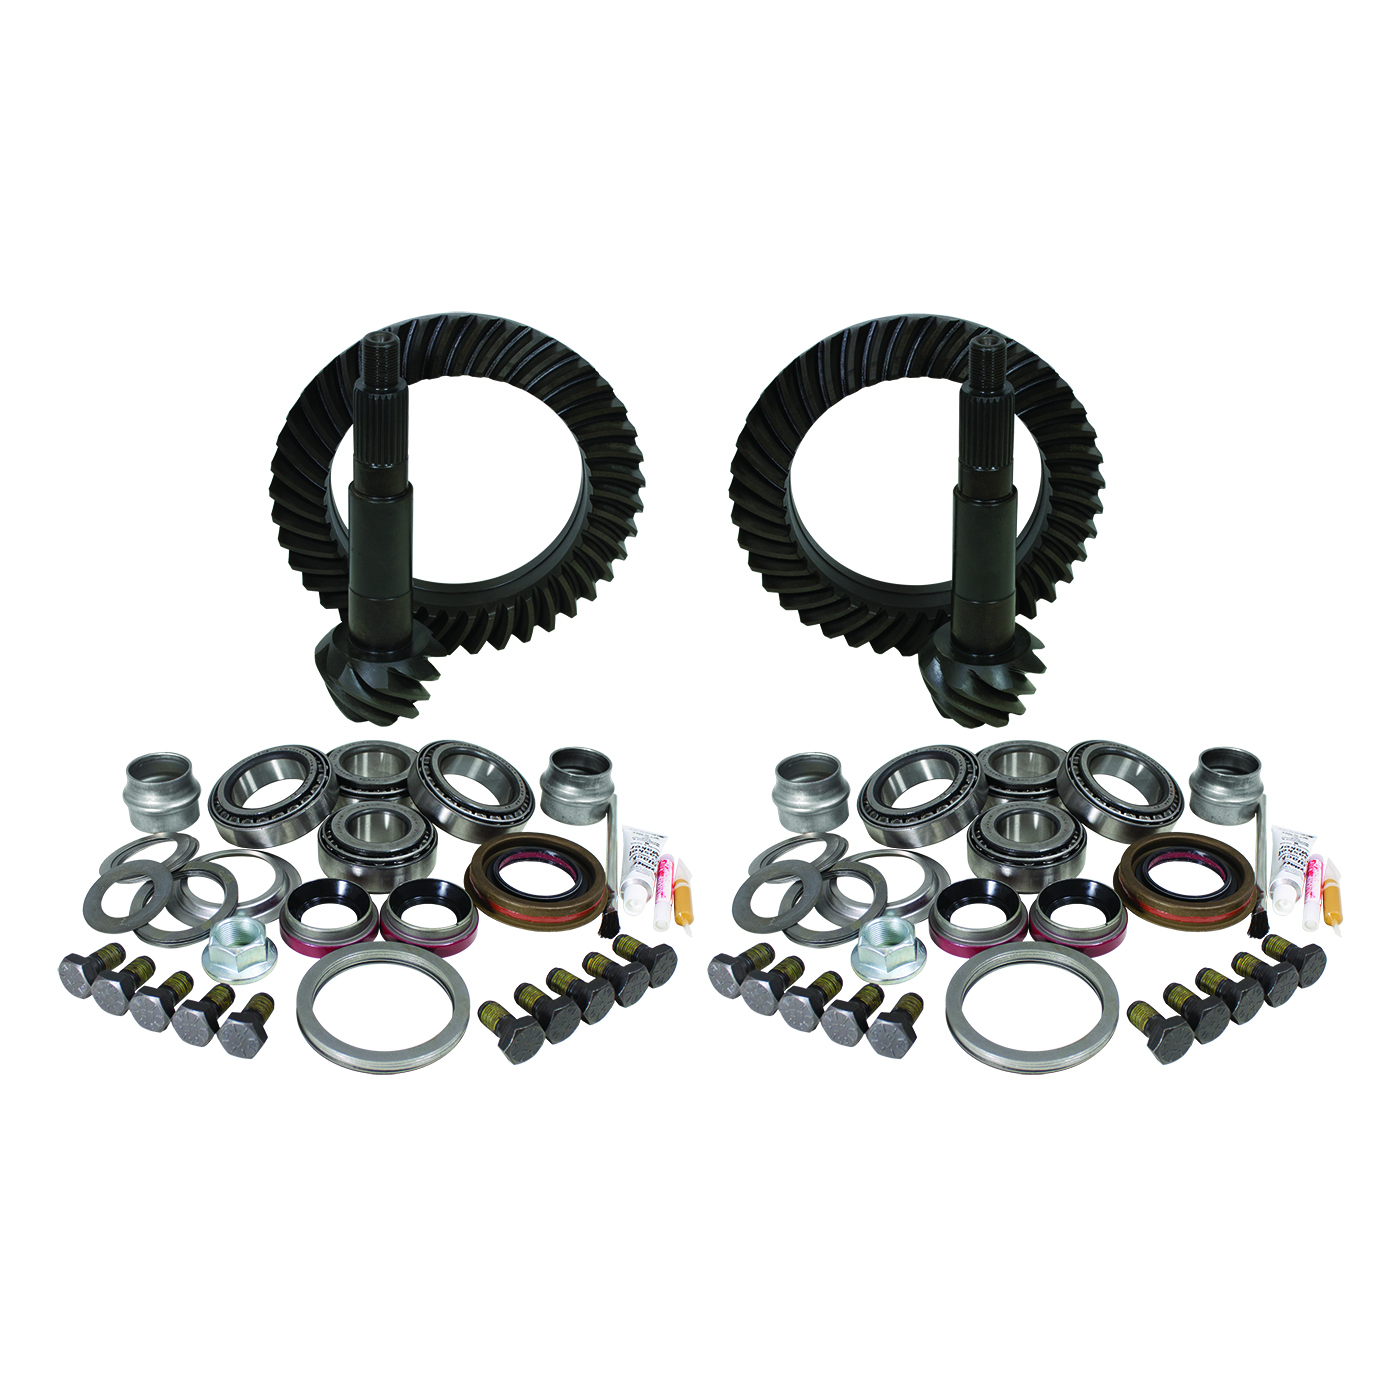 USA Standard Gear & Install Kit package for Jeep JK Rubicon, 5.13 ratio